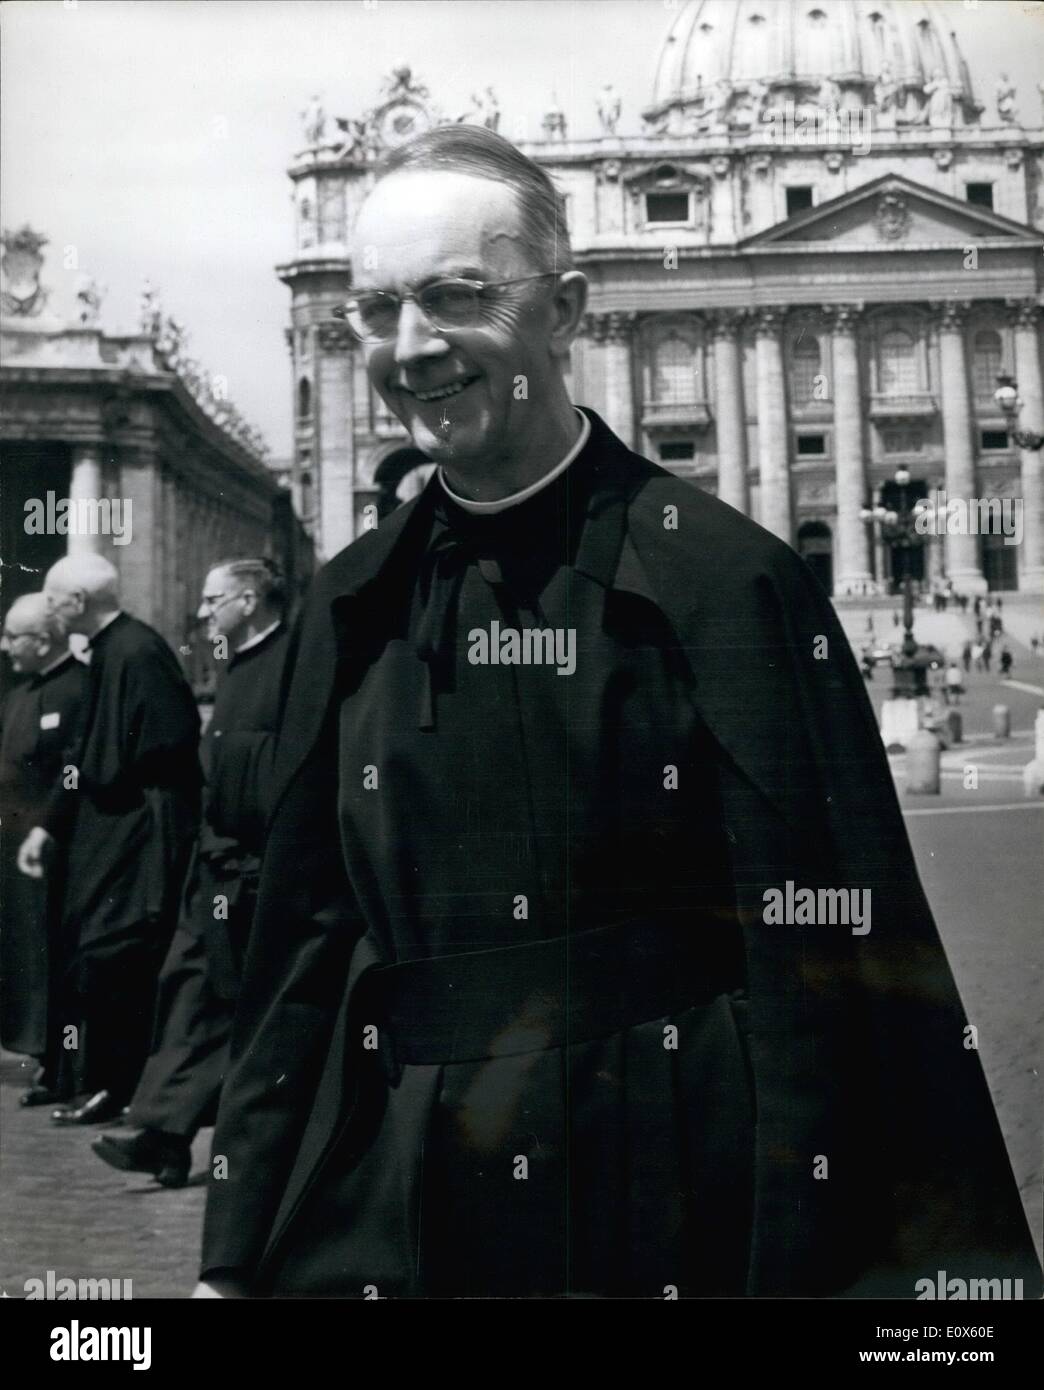 May 05, 1965 - Pope Receives Jesuit Delegates: The 225 Jesuits from all the parts of the world who are gathered in Rome to elect a new Provost. General, were given an audience with the Pope at the Vatican on Friday. The election of the 28th successor of St. Ignatius Loyola, who founded the Order on 1940, may not take place for a week or even longer. Photo shows Jesuit Father John Swain of Canada, pictured at the Vatican arriving for the audience with the Pope. Stock Photo